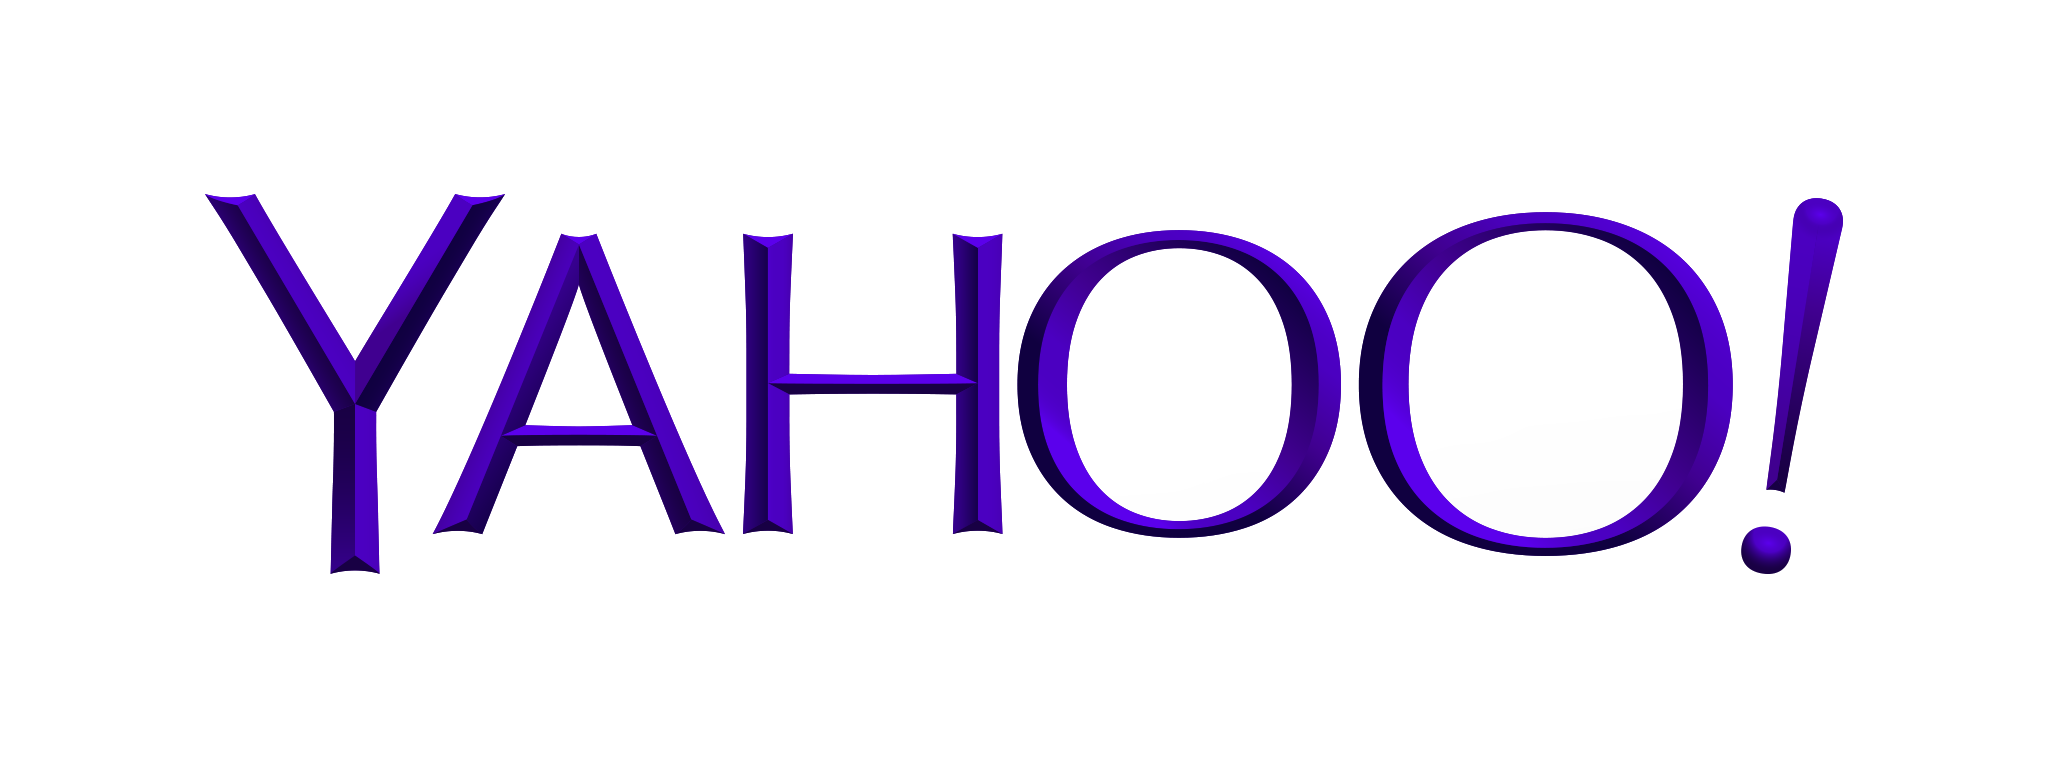 Yahoo rumored to wage war on Google Now, Siri, and Cortana with its own personal assistant, &quot;Index&quot;